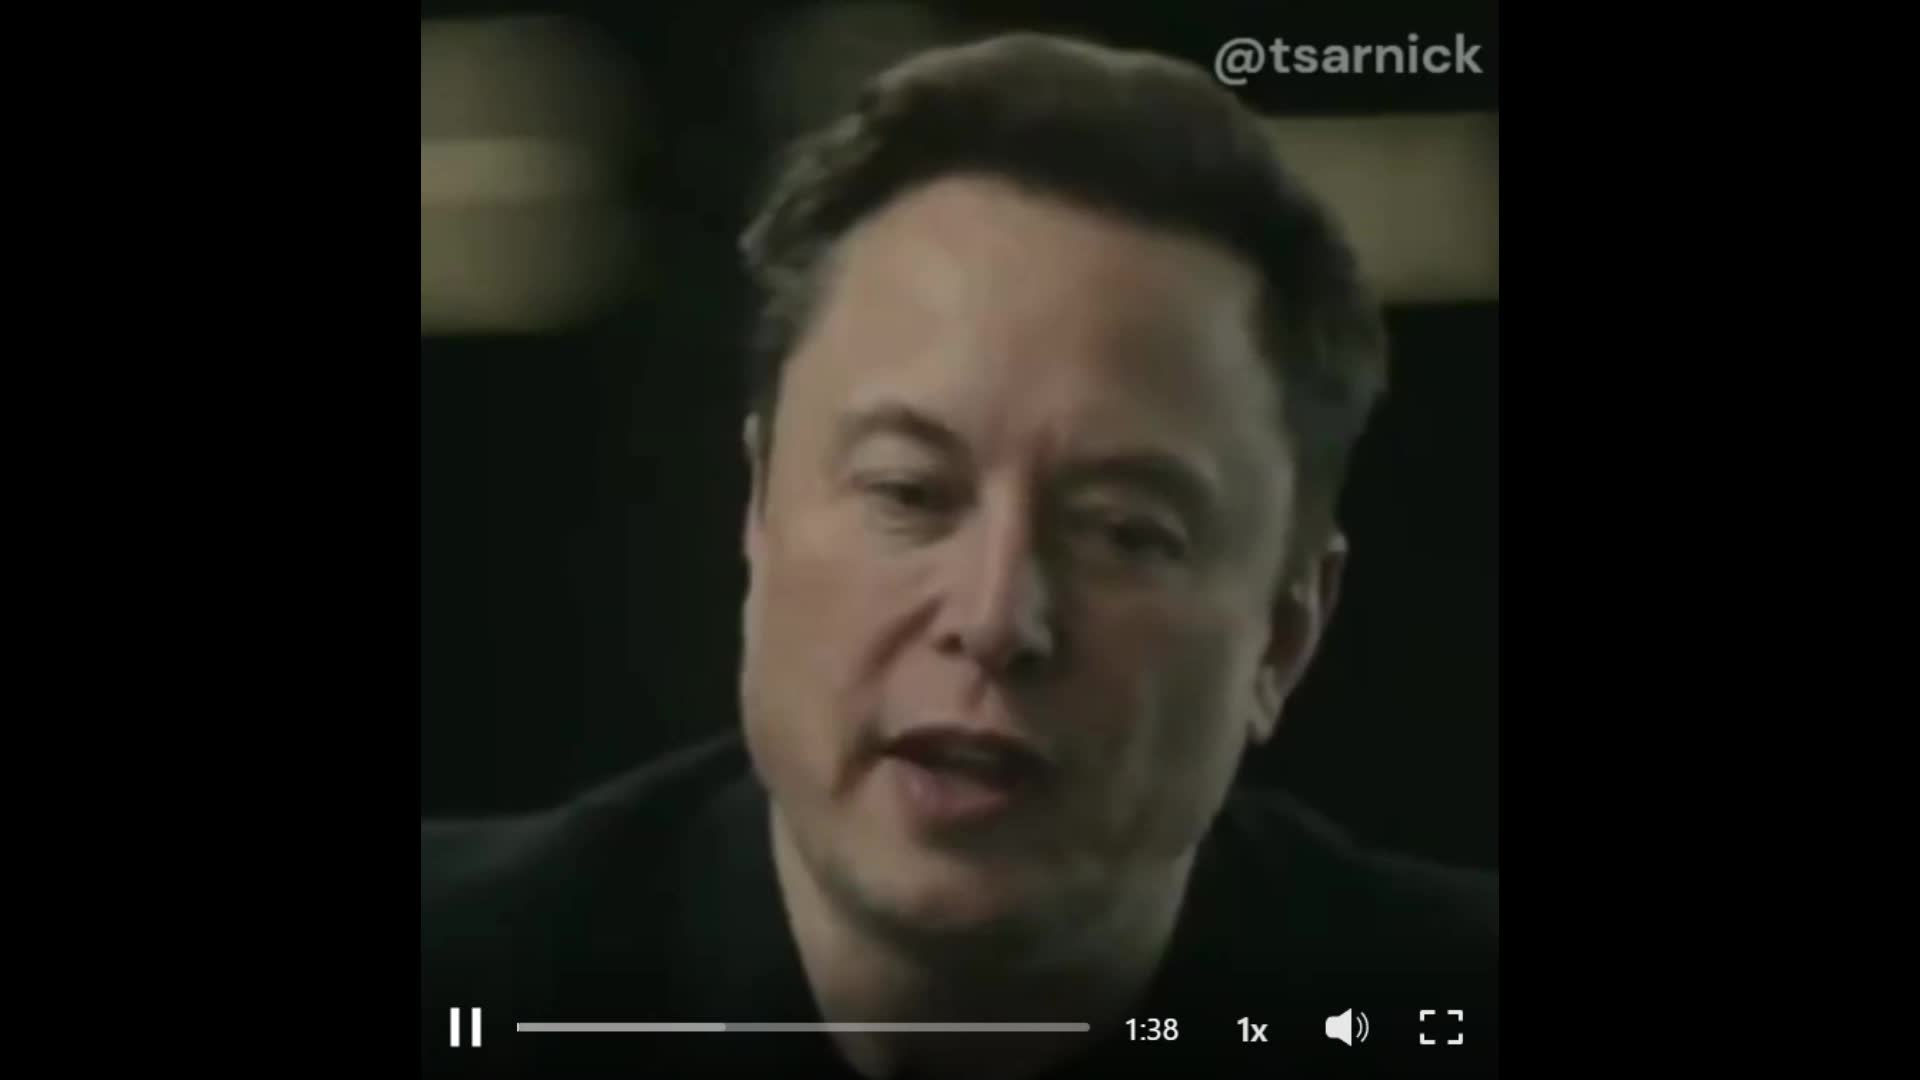 Elon Musk xAI will be the most powerful AI in the World